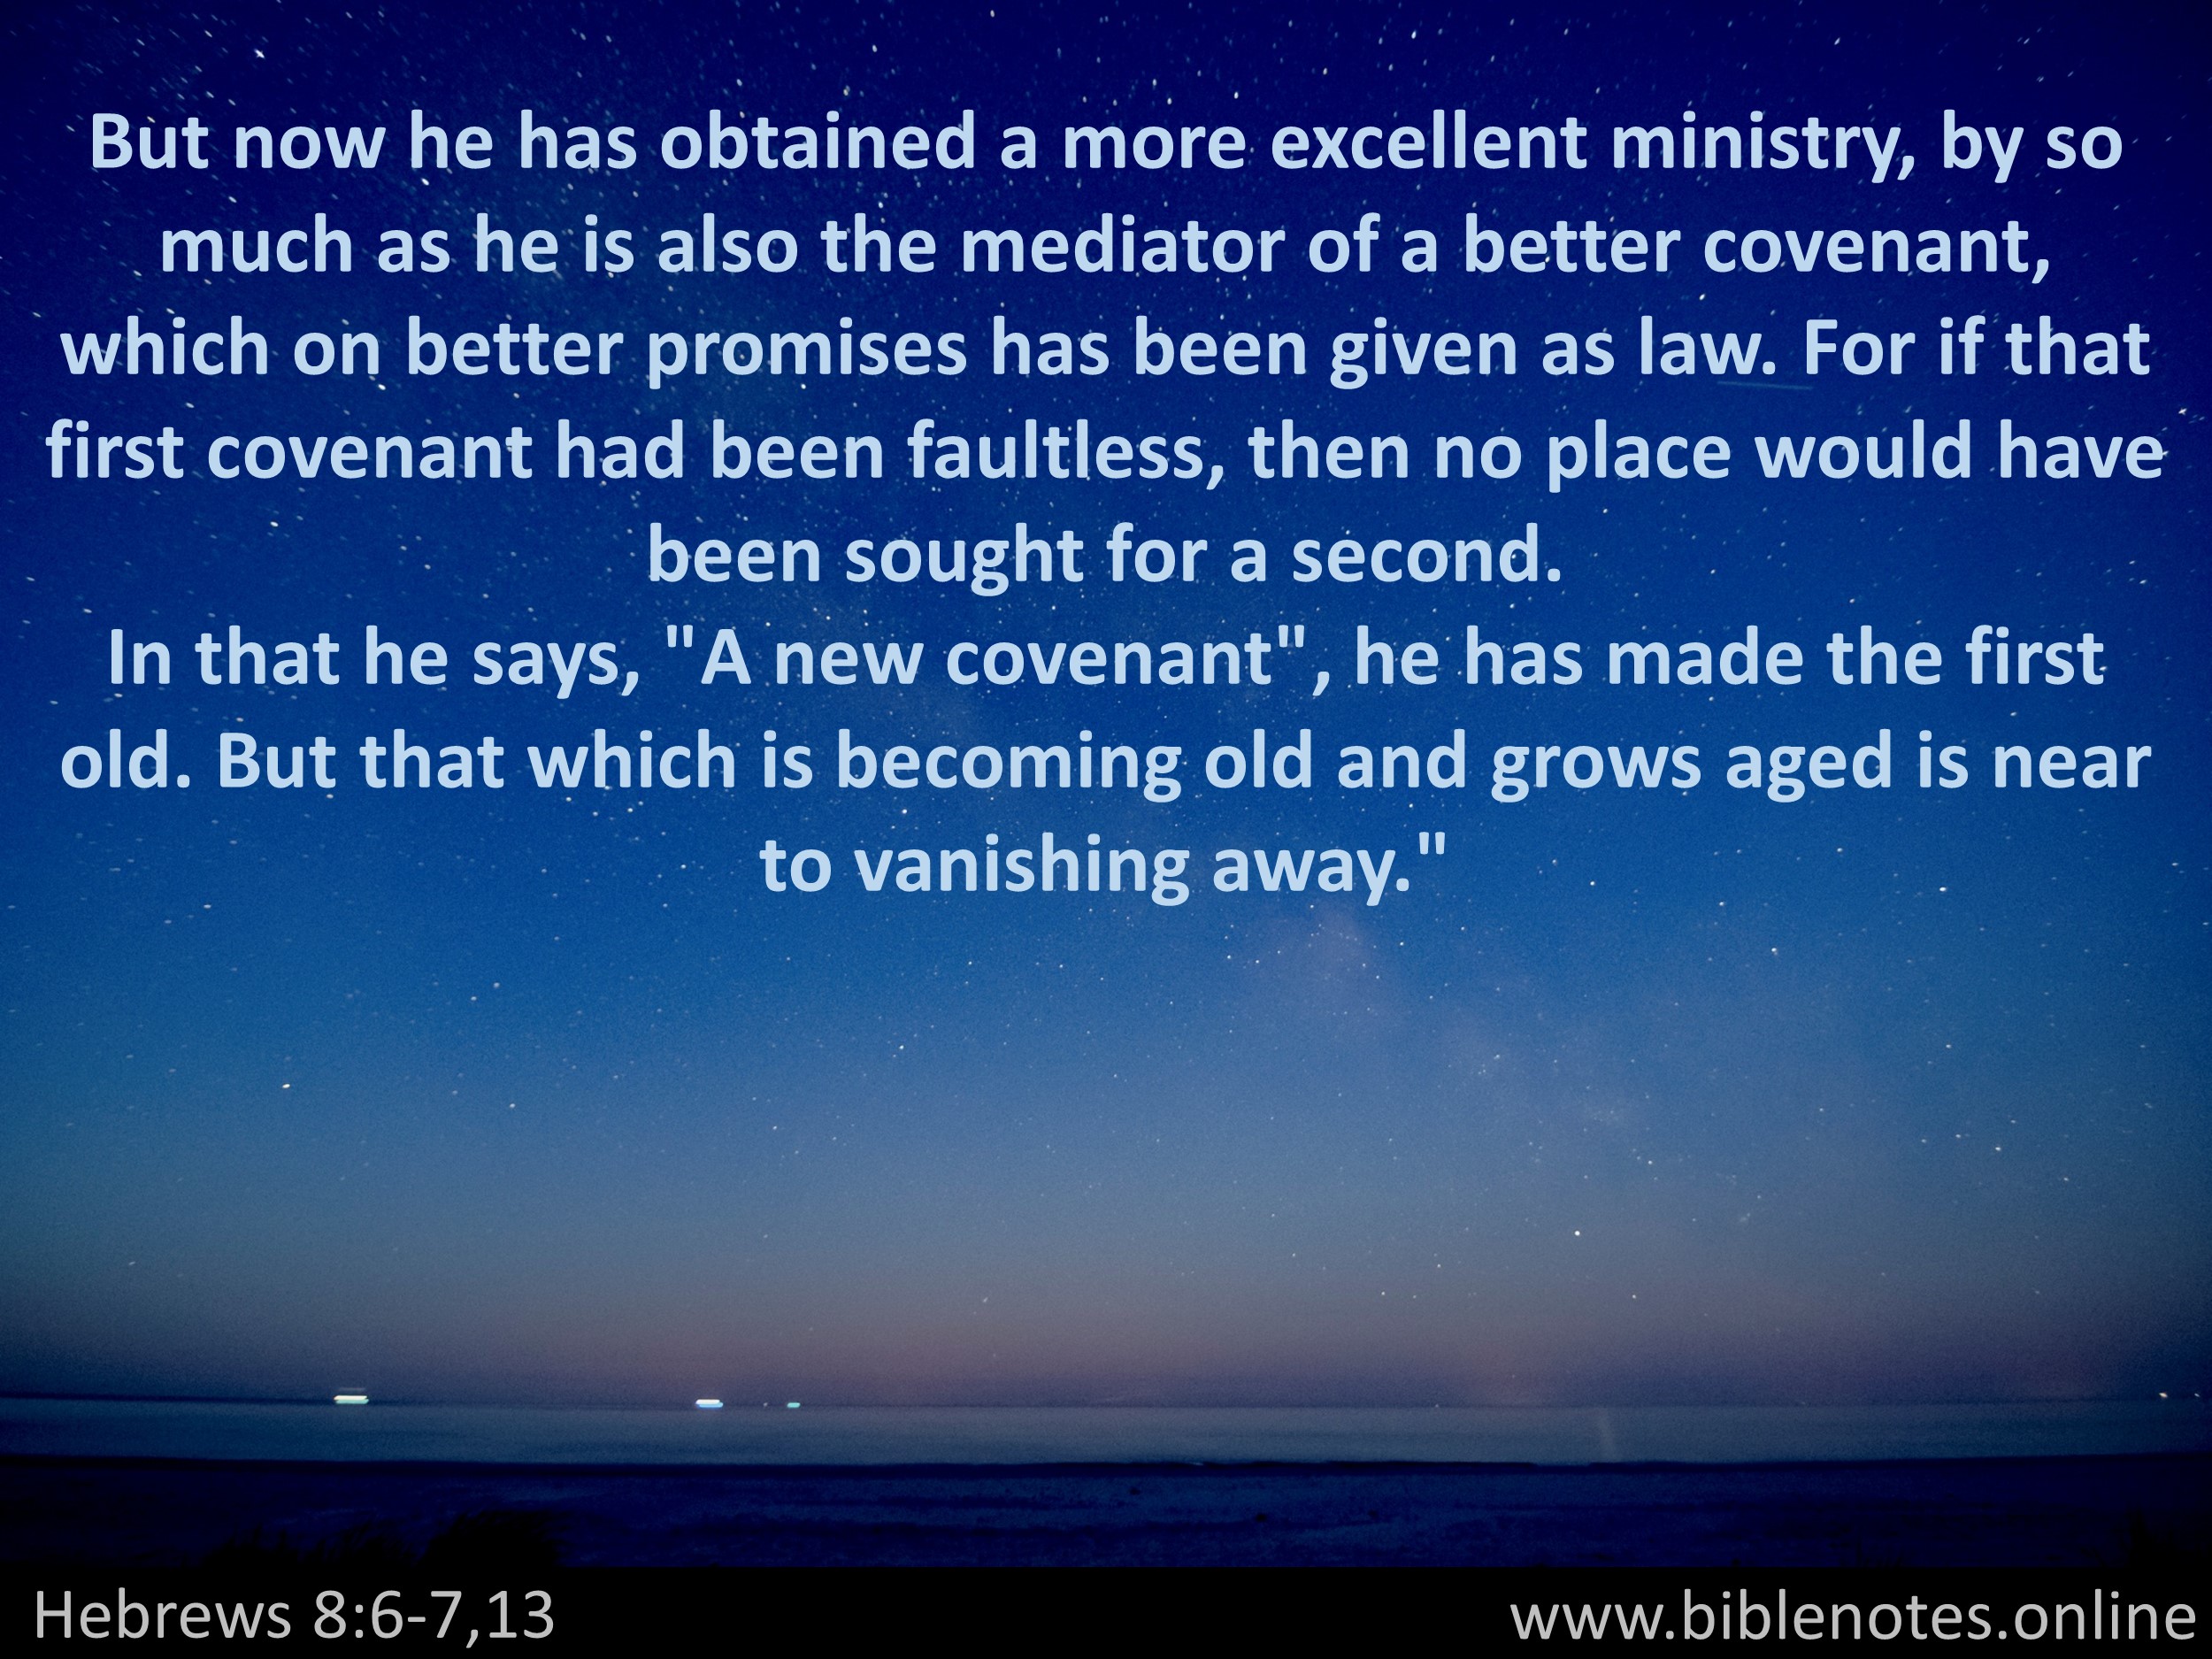 Bible Verse from Hebrews Chapter 8